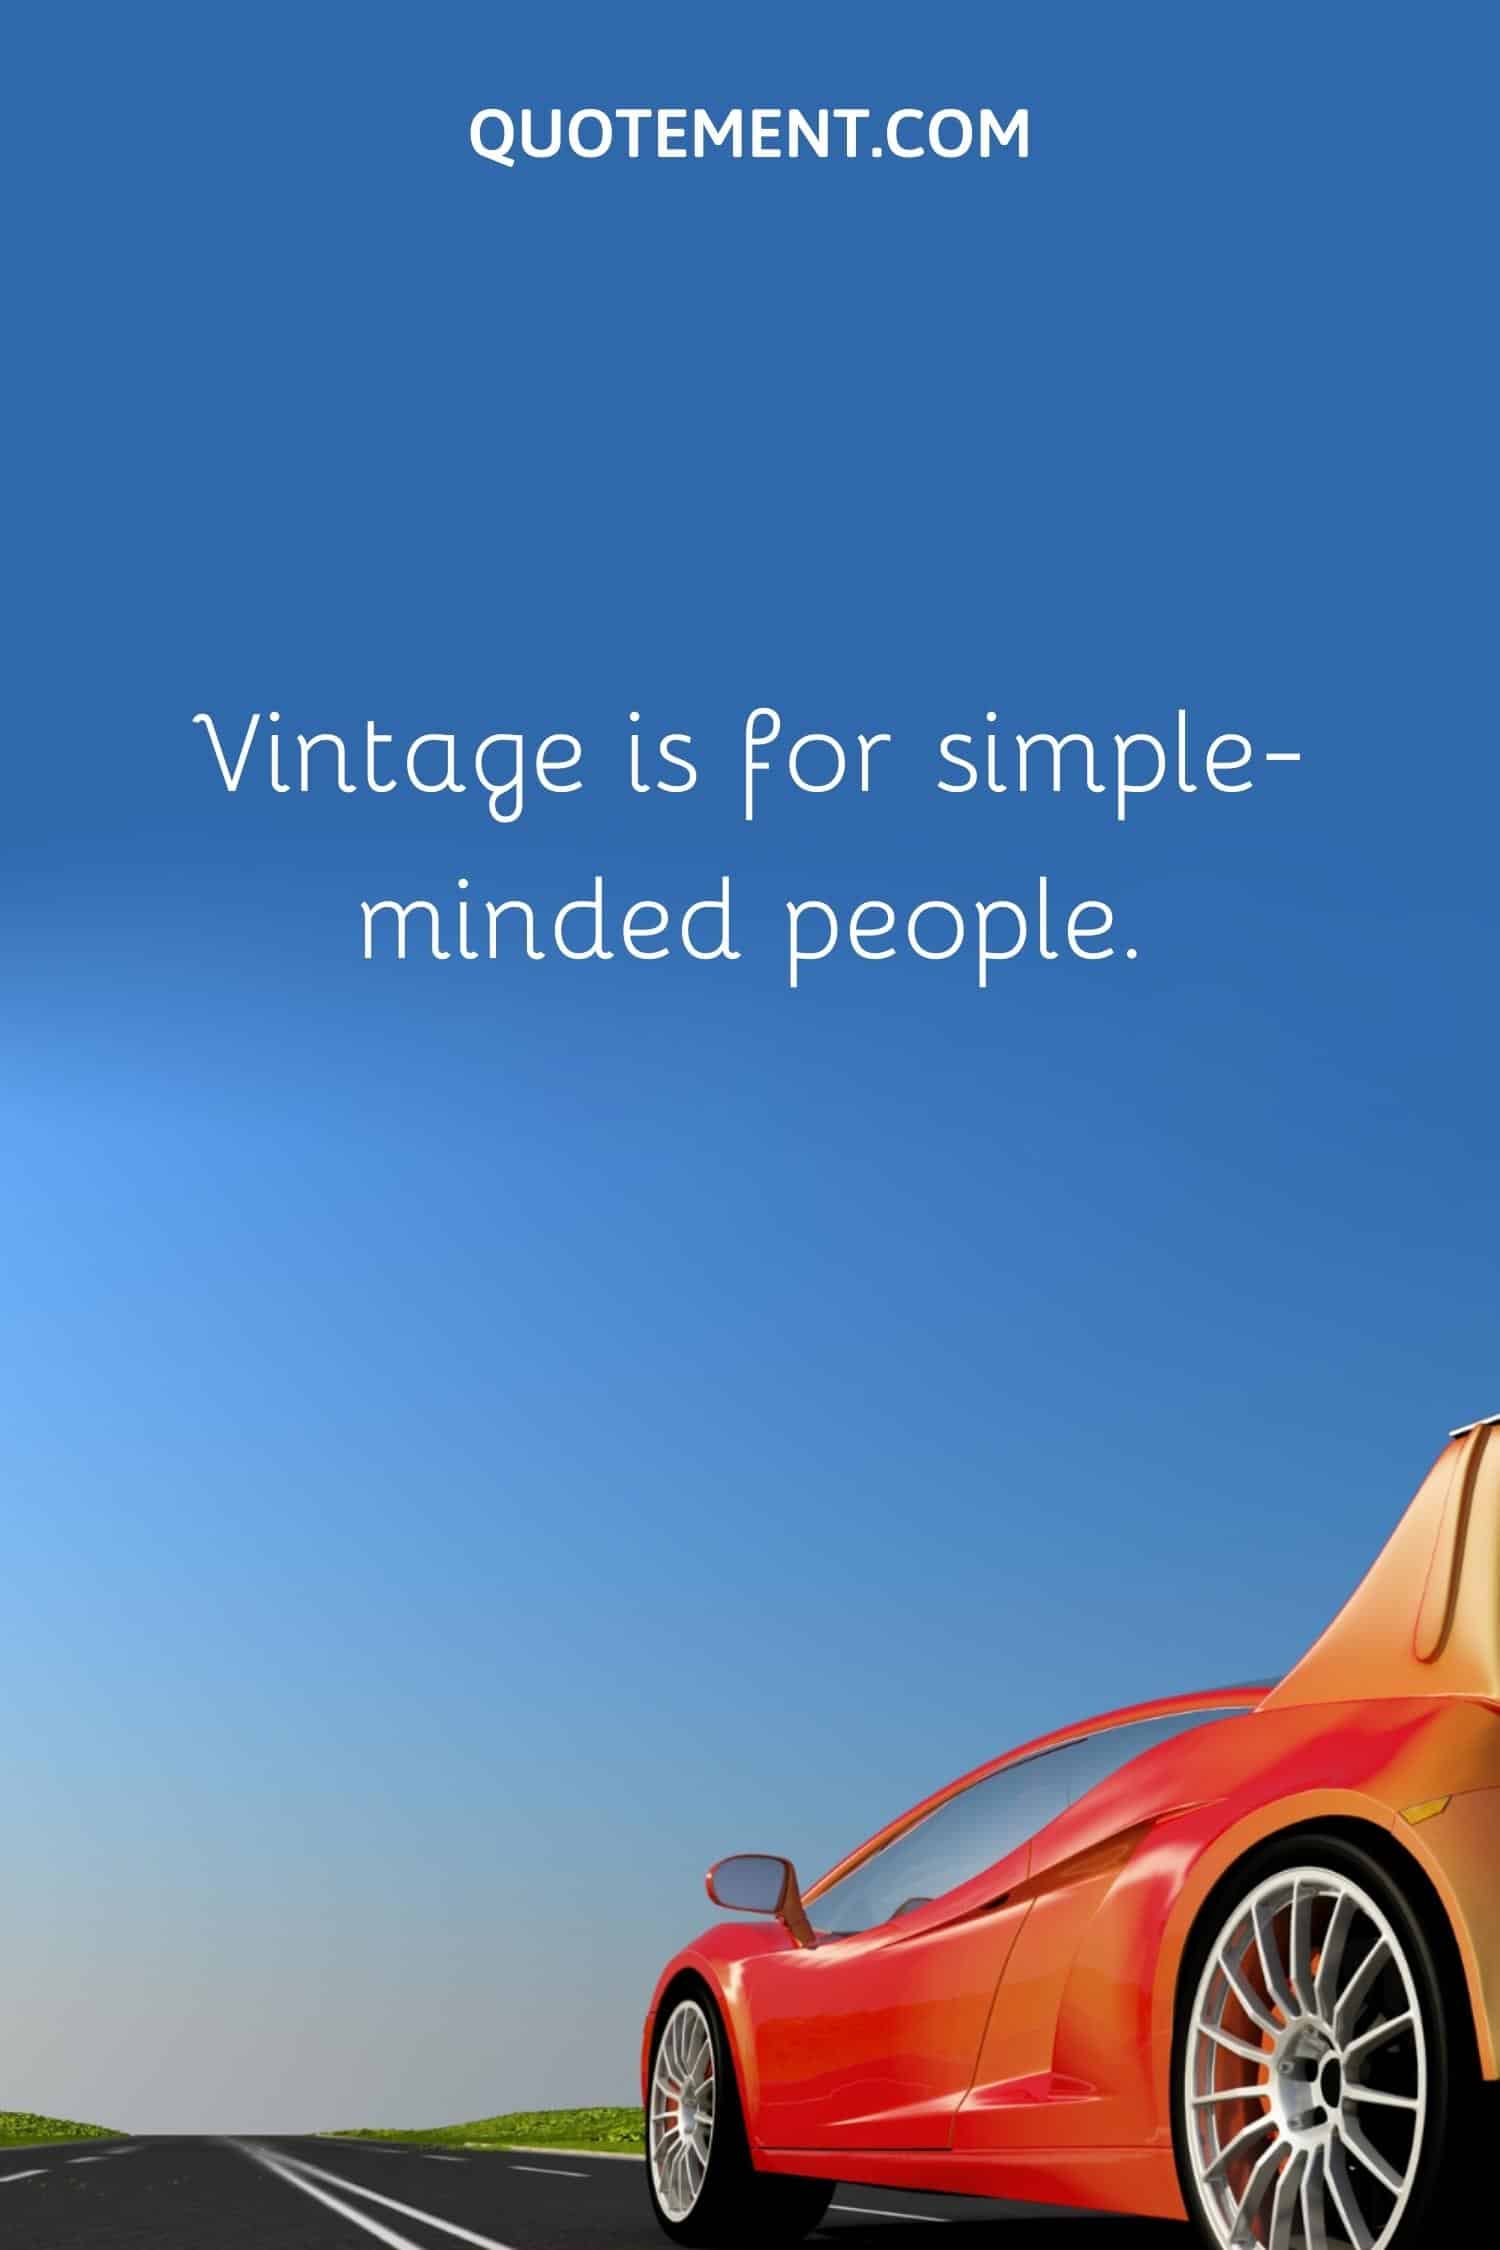 . Vintage is for simple-minded people